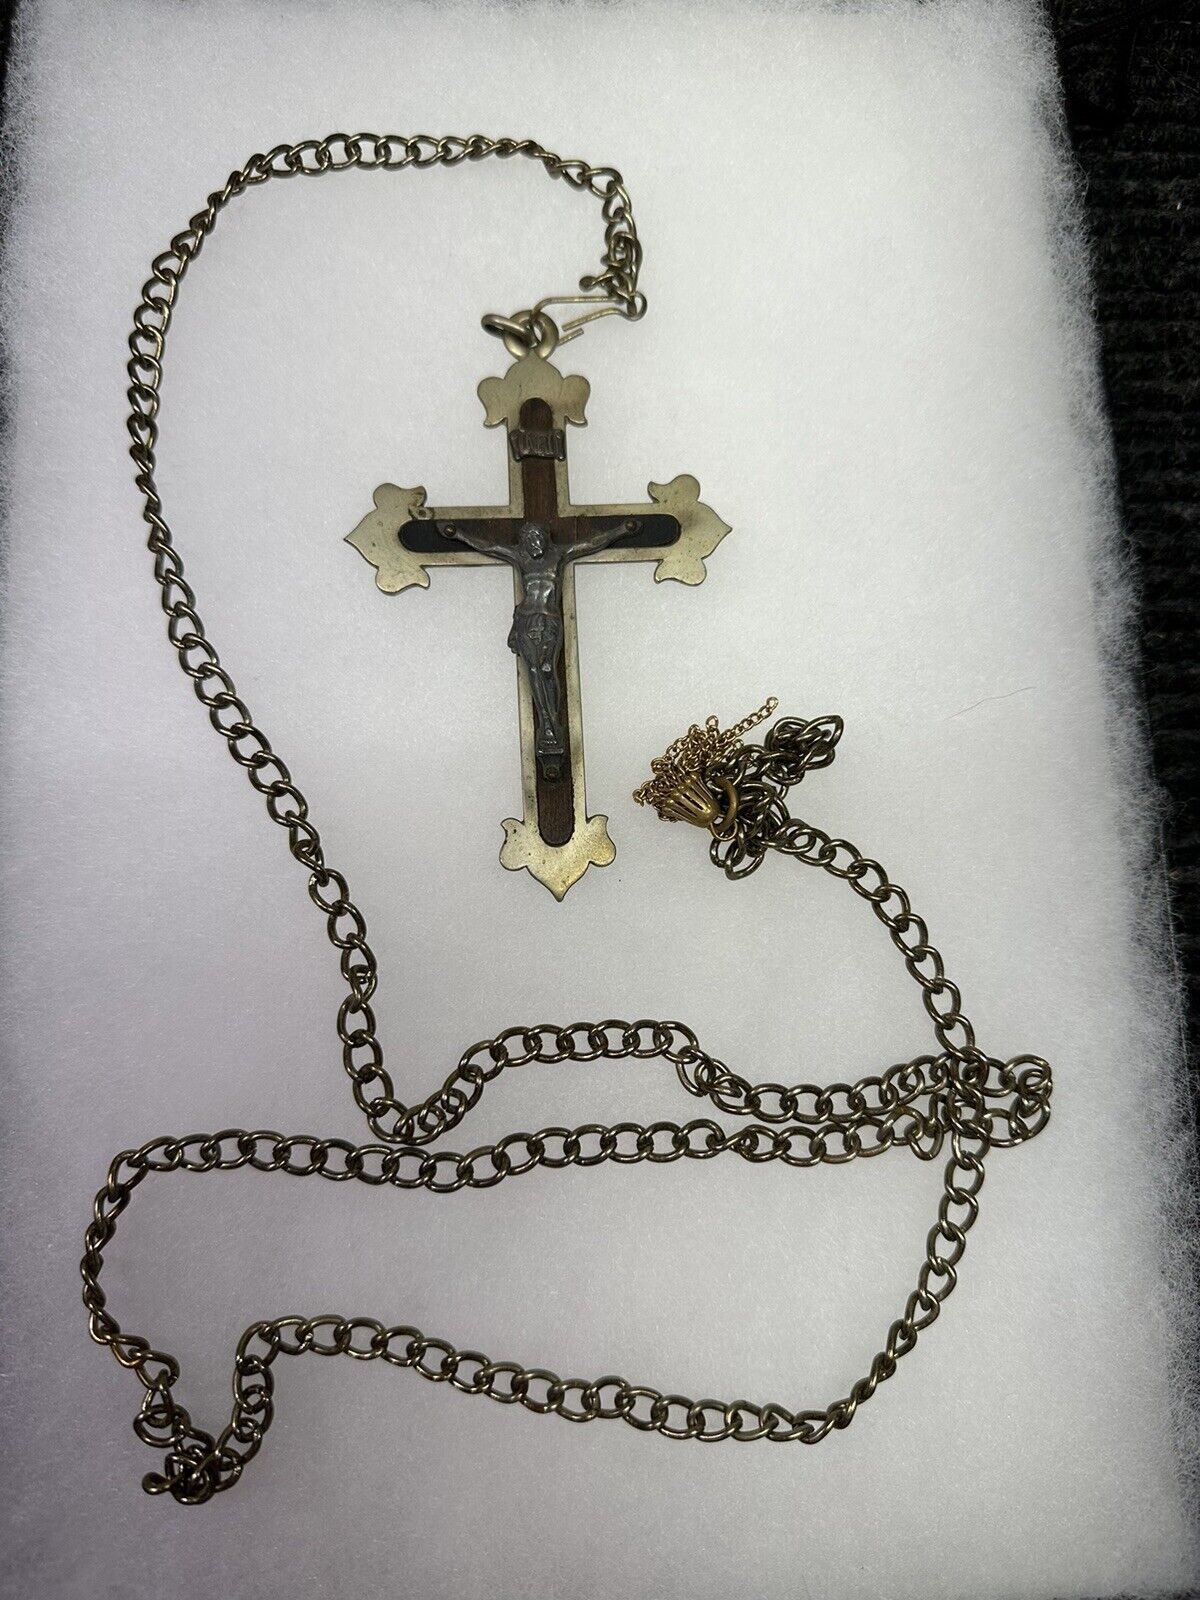 Large Silver Tone Antique Cross 4.5” By 2.7” With Wood Inlay (42” Chain)